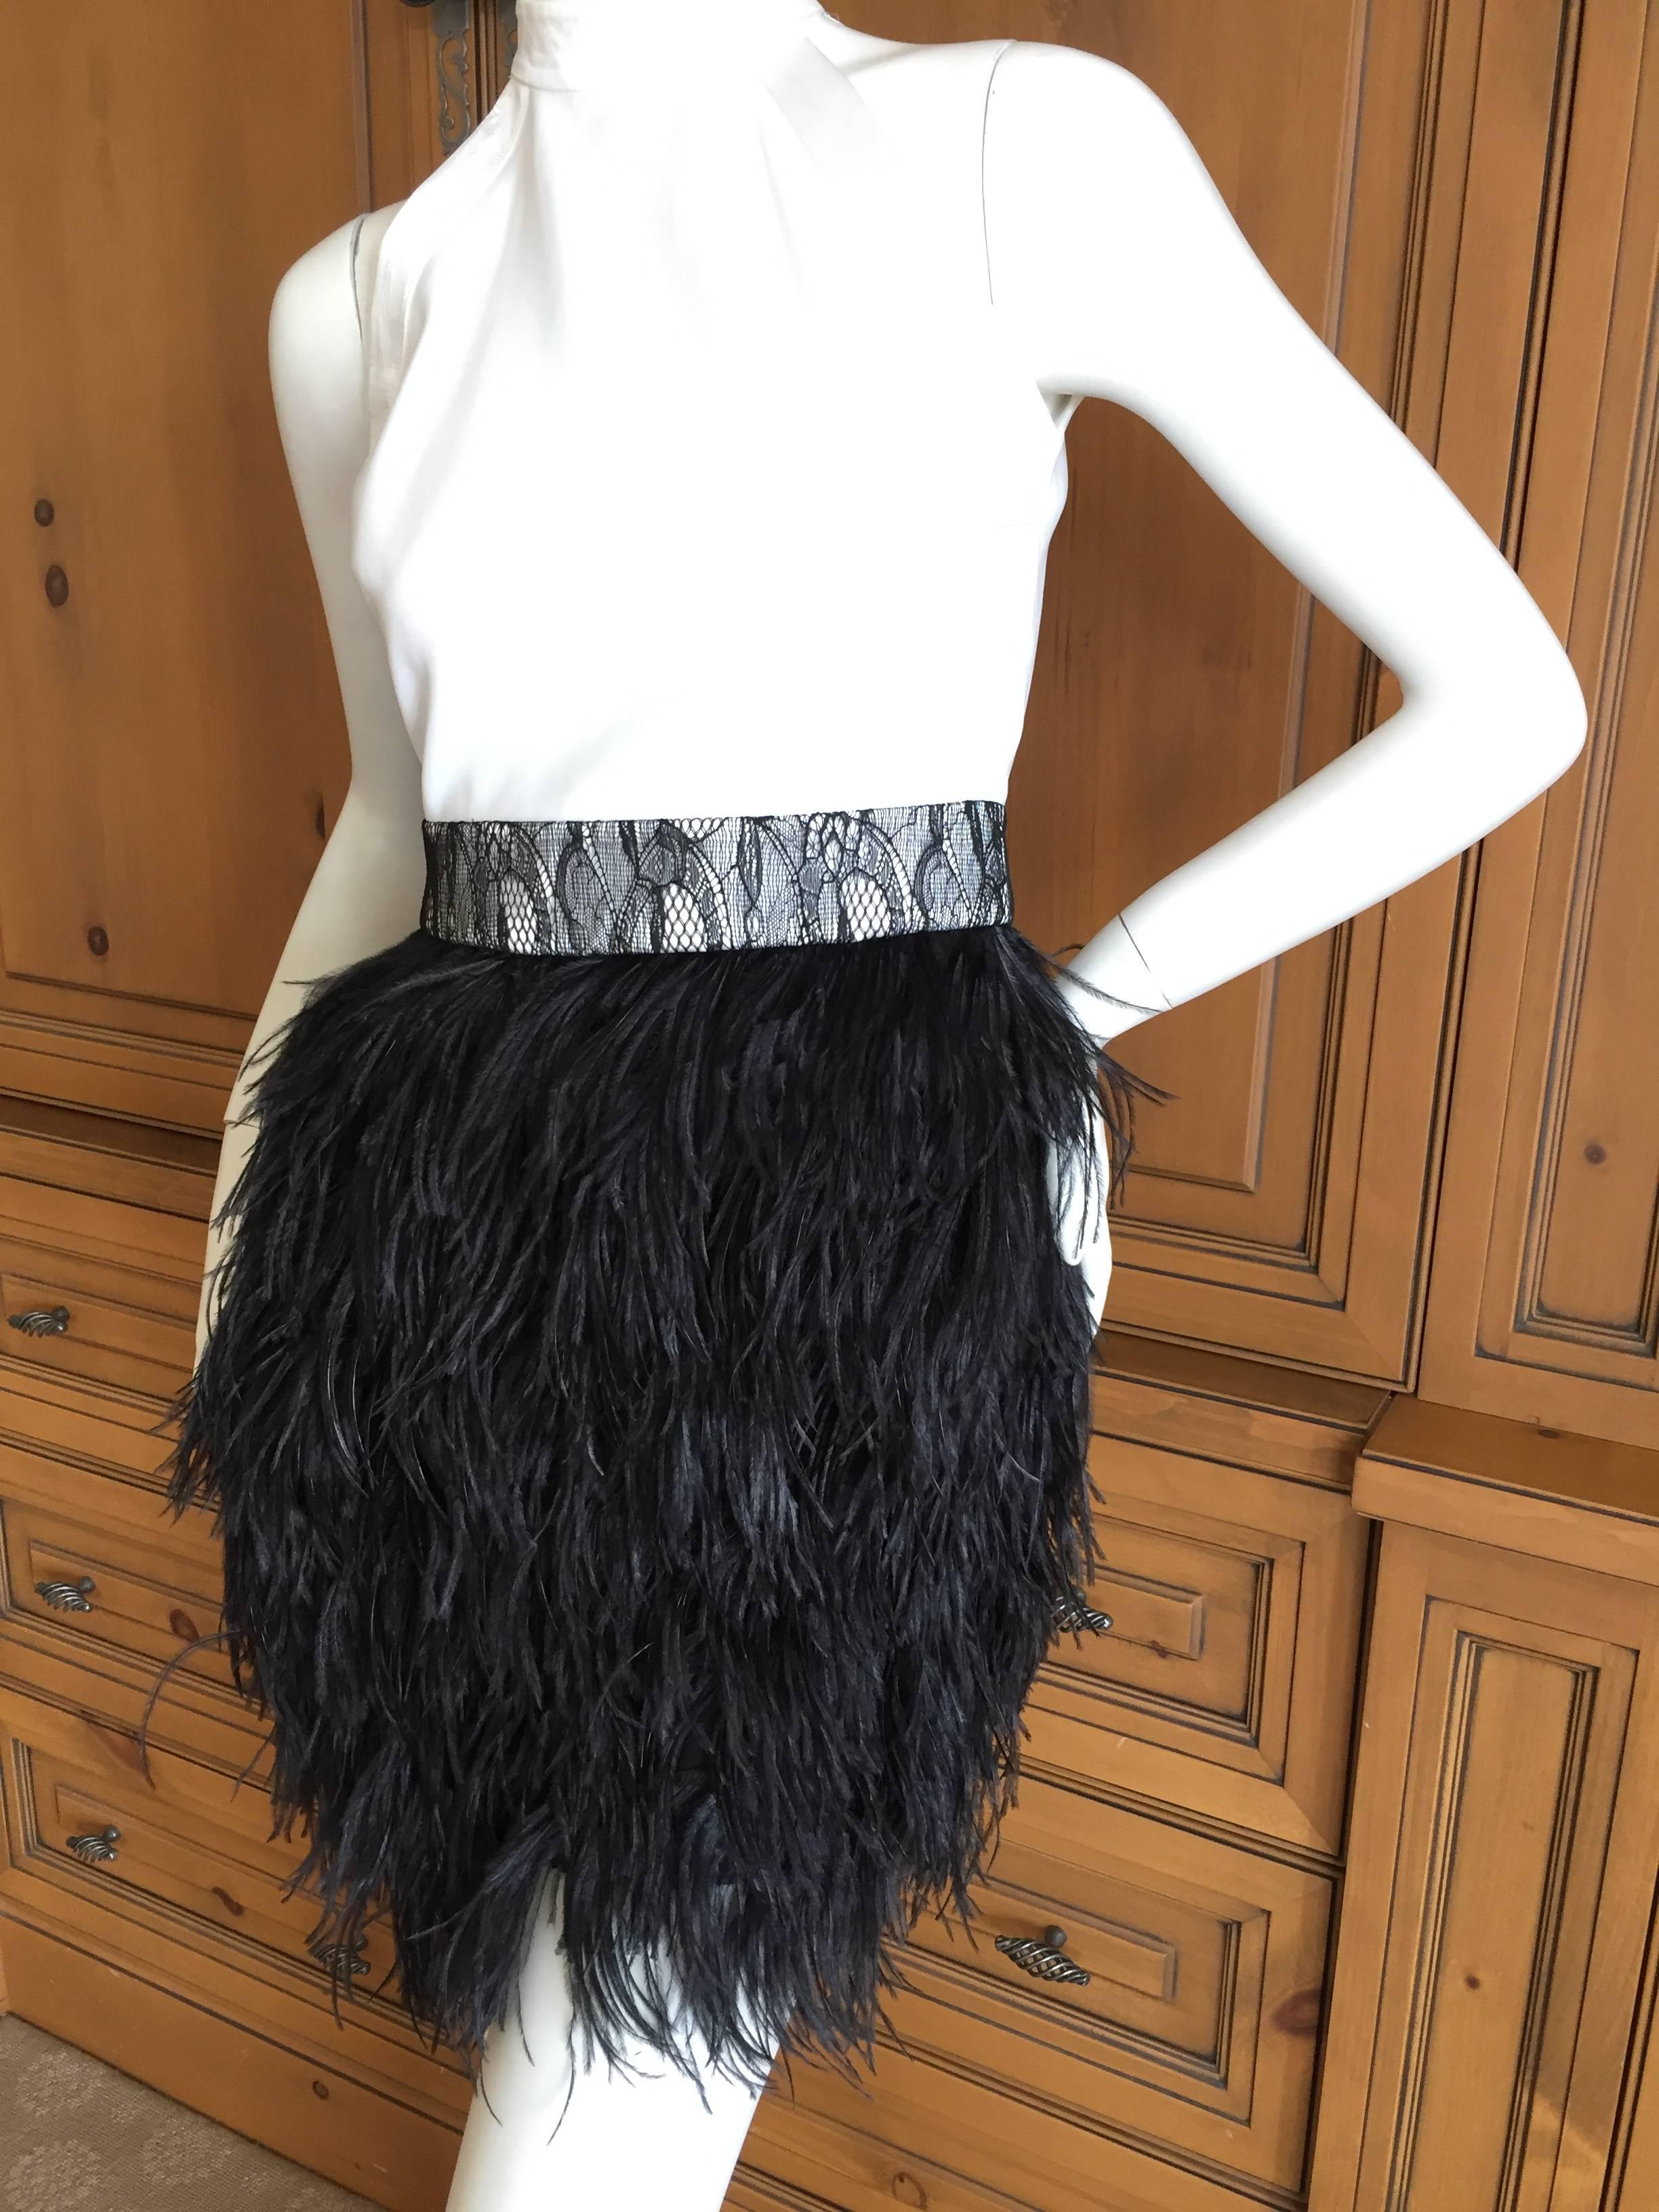 Givenchy by Riccardo Tischi Cocktail Dress with Feather Skirt 2011 For Sale 1